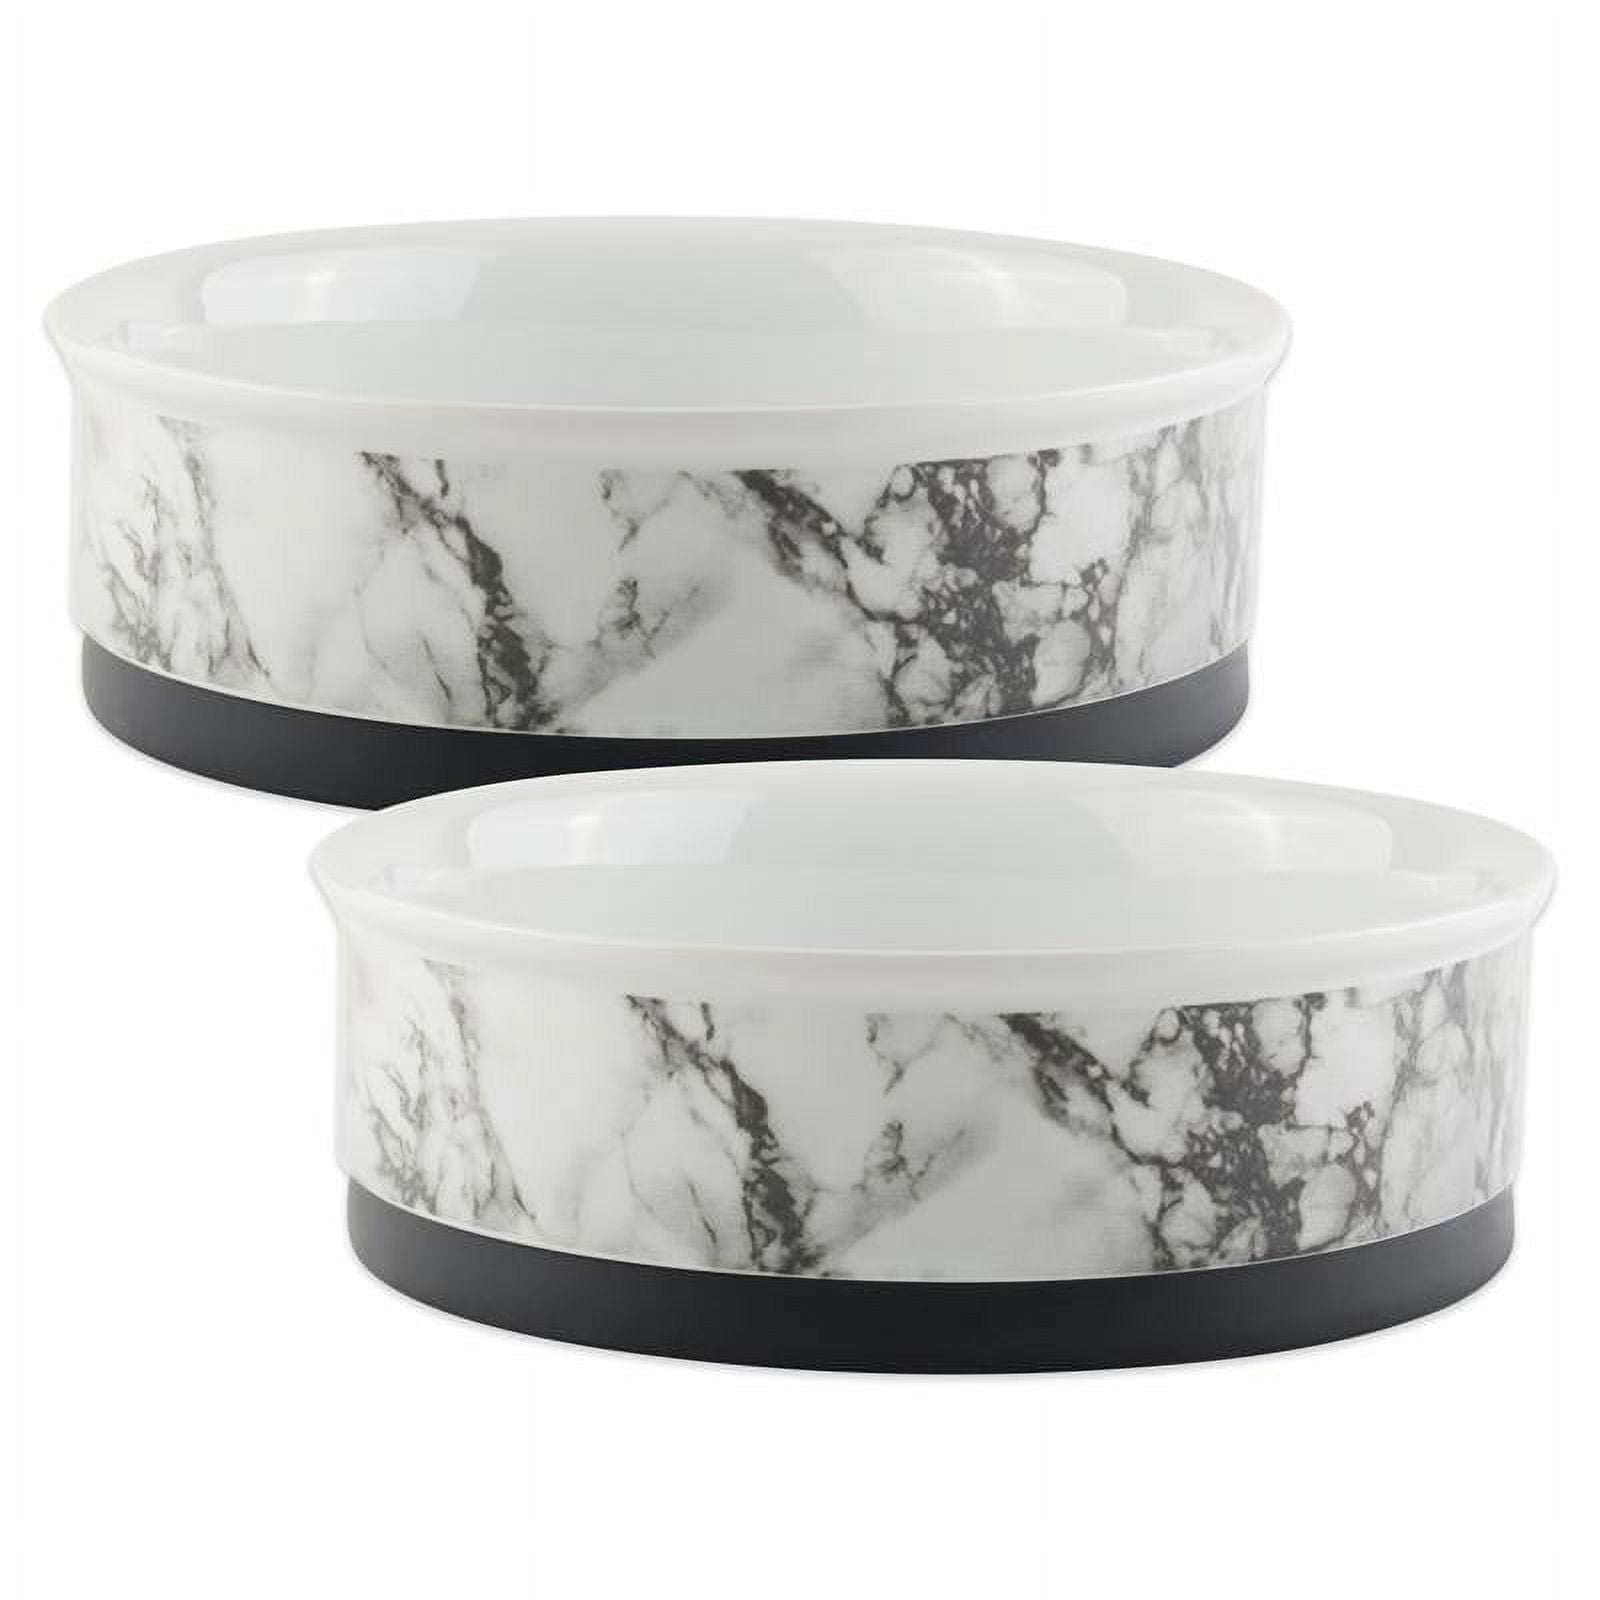 Picture of Design Imports CAMZ10397 6 x 2 in. White & Marble Pet Bowl - Medium - Set of 2